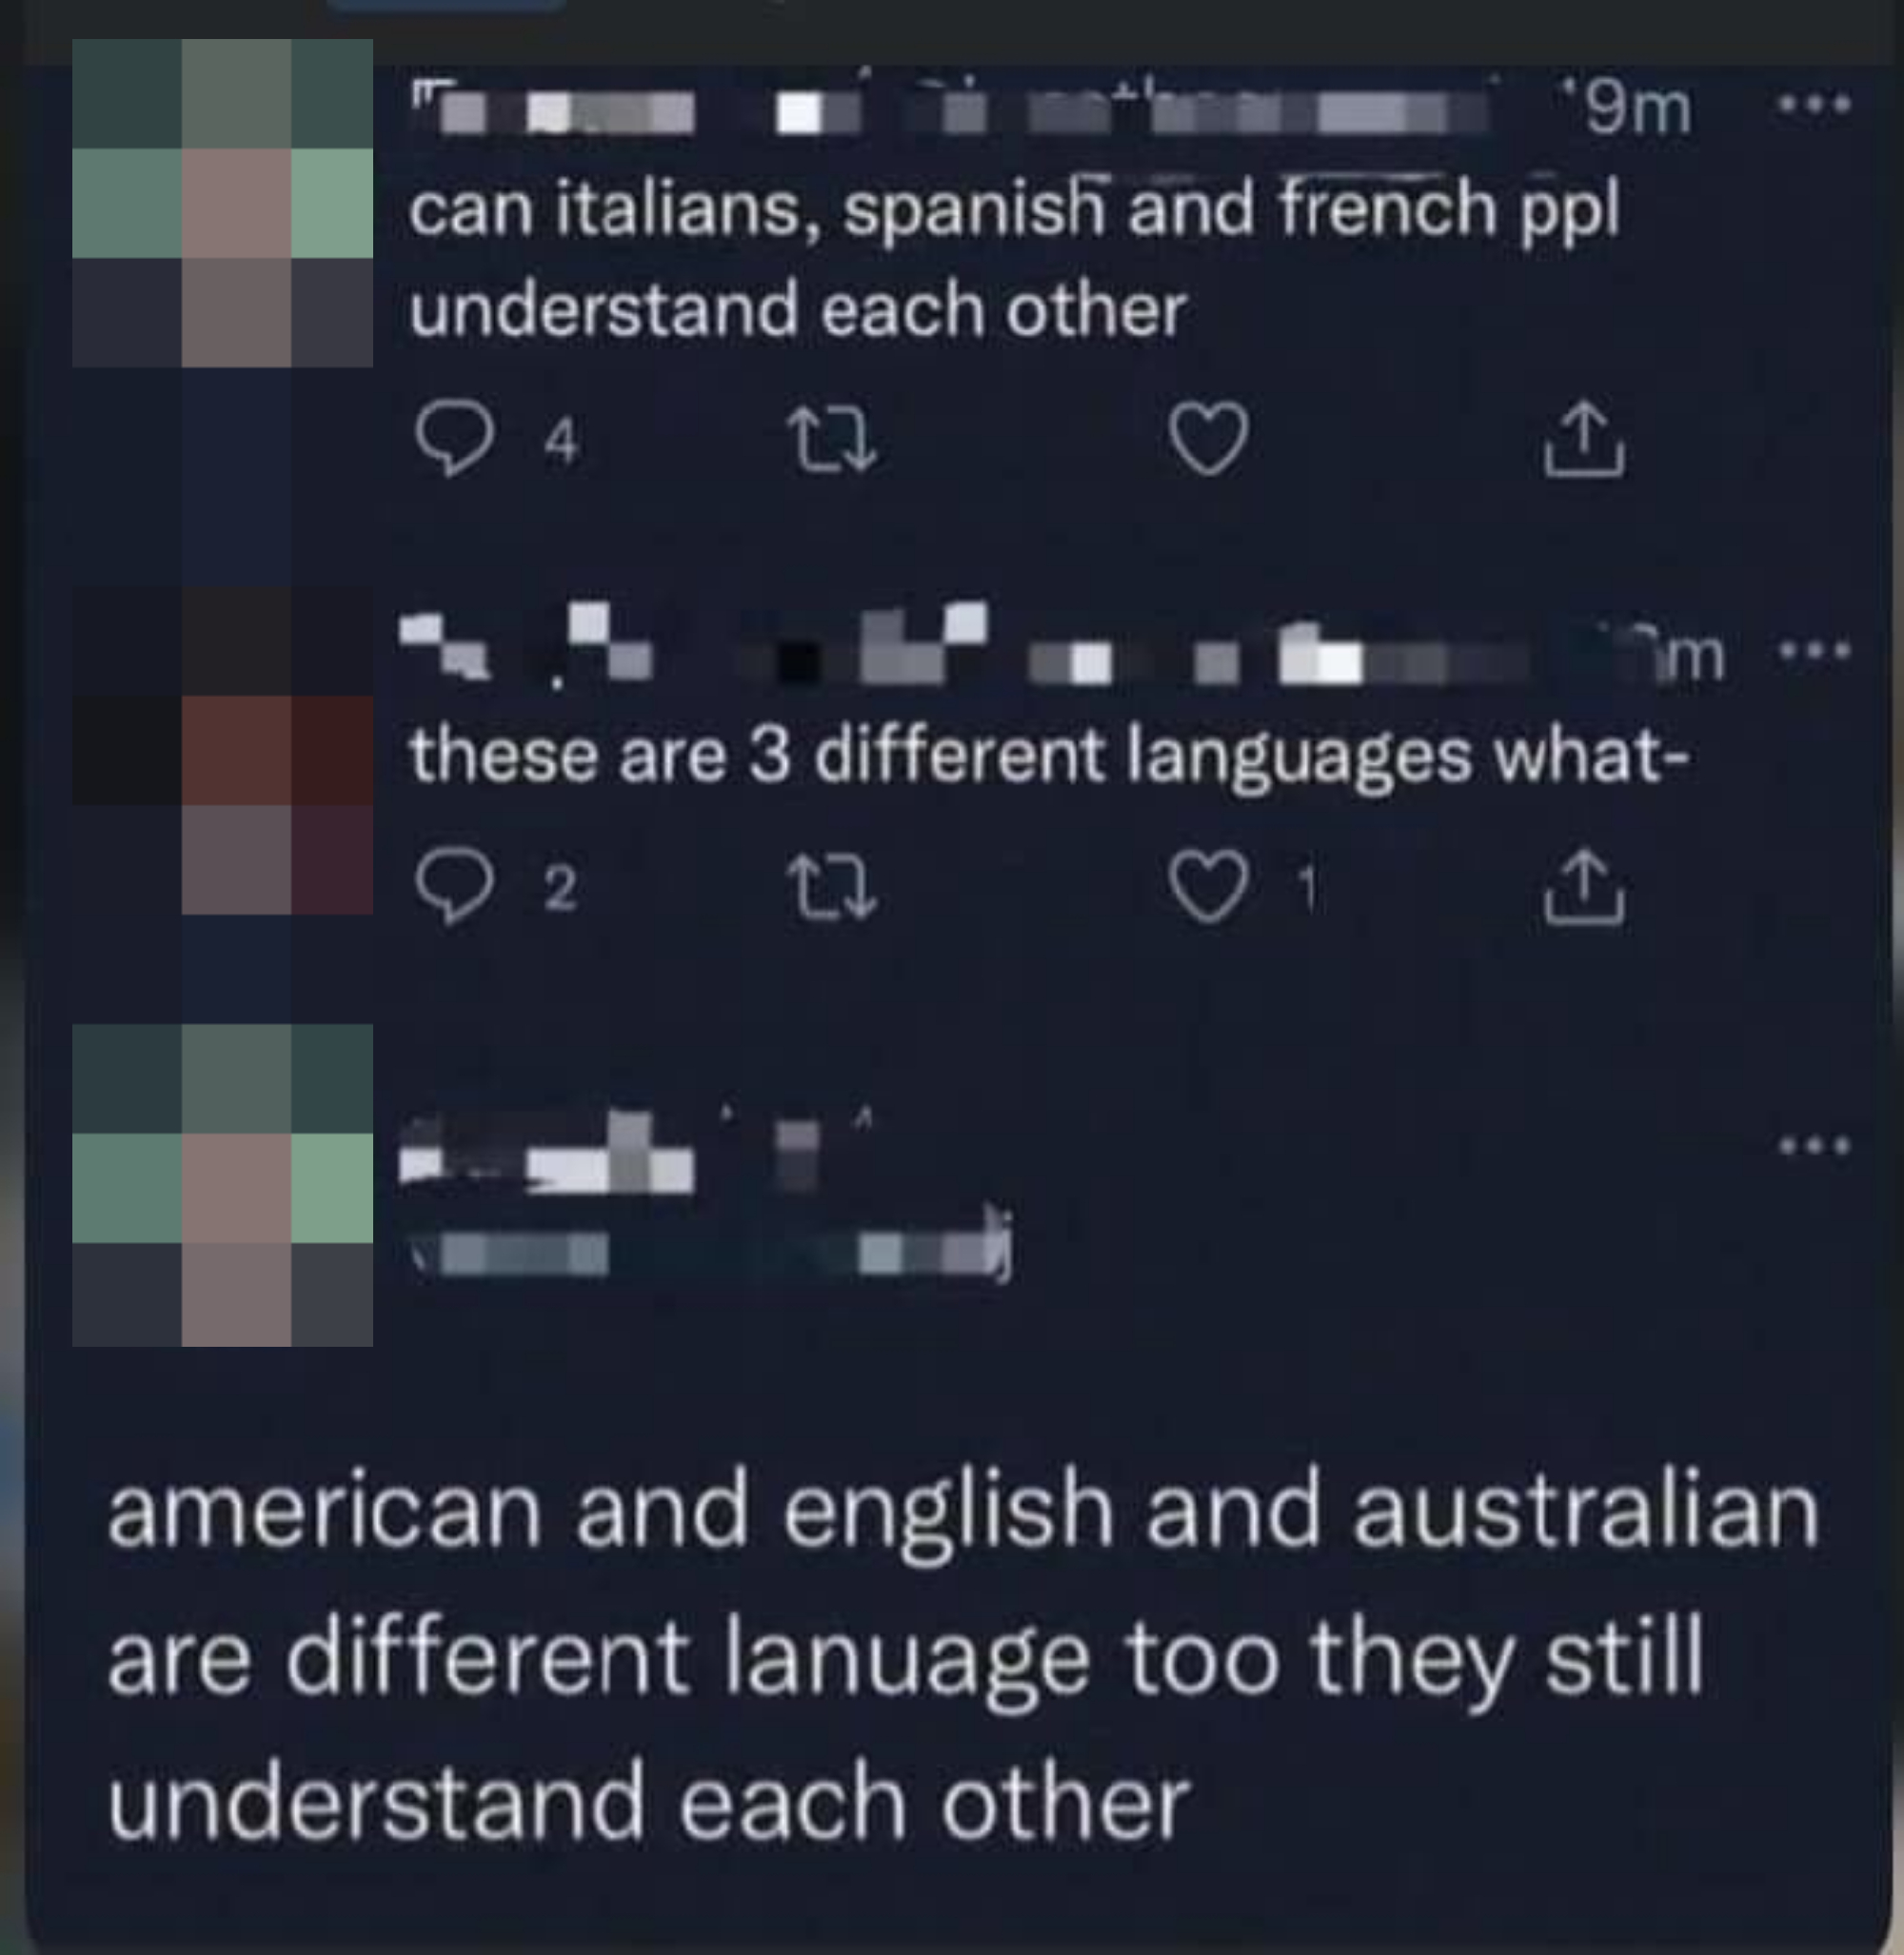 &quot;these are 3 different languages what-&quot;